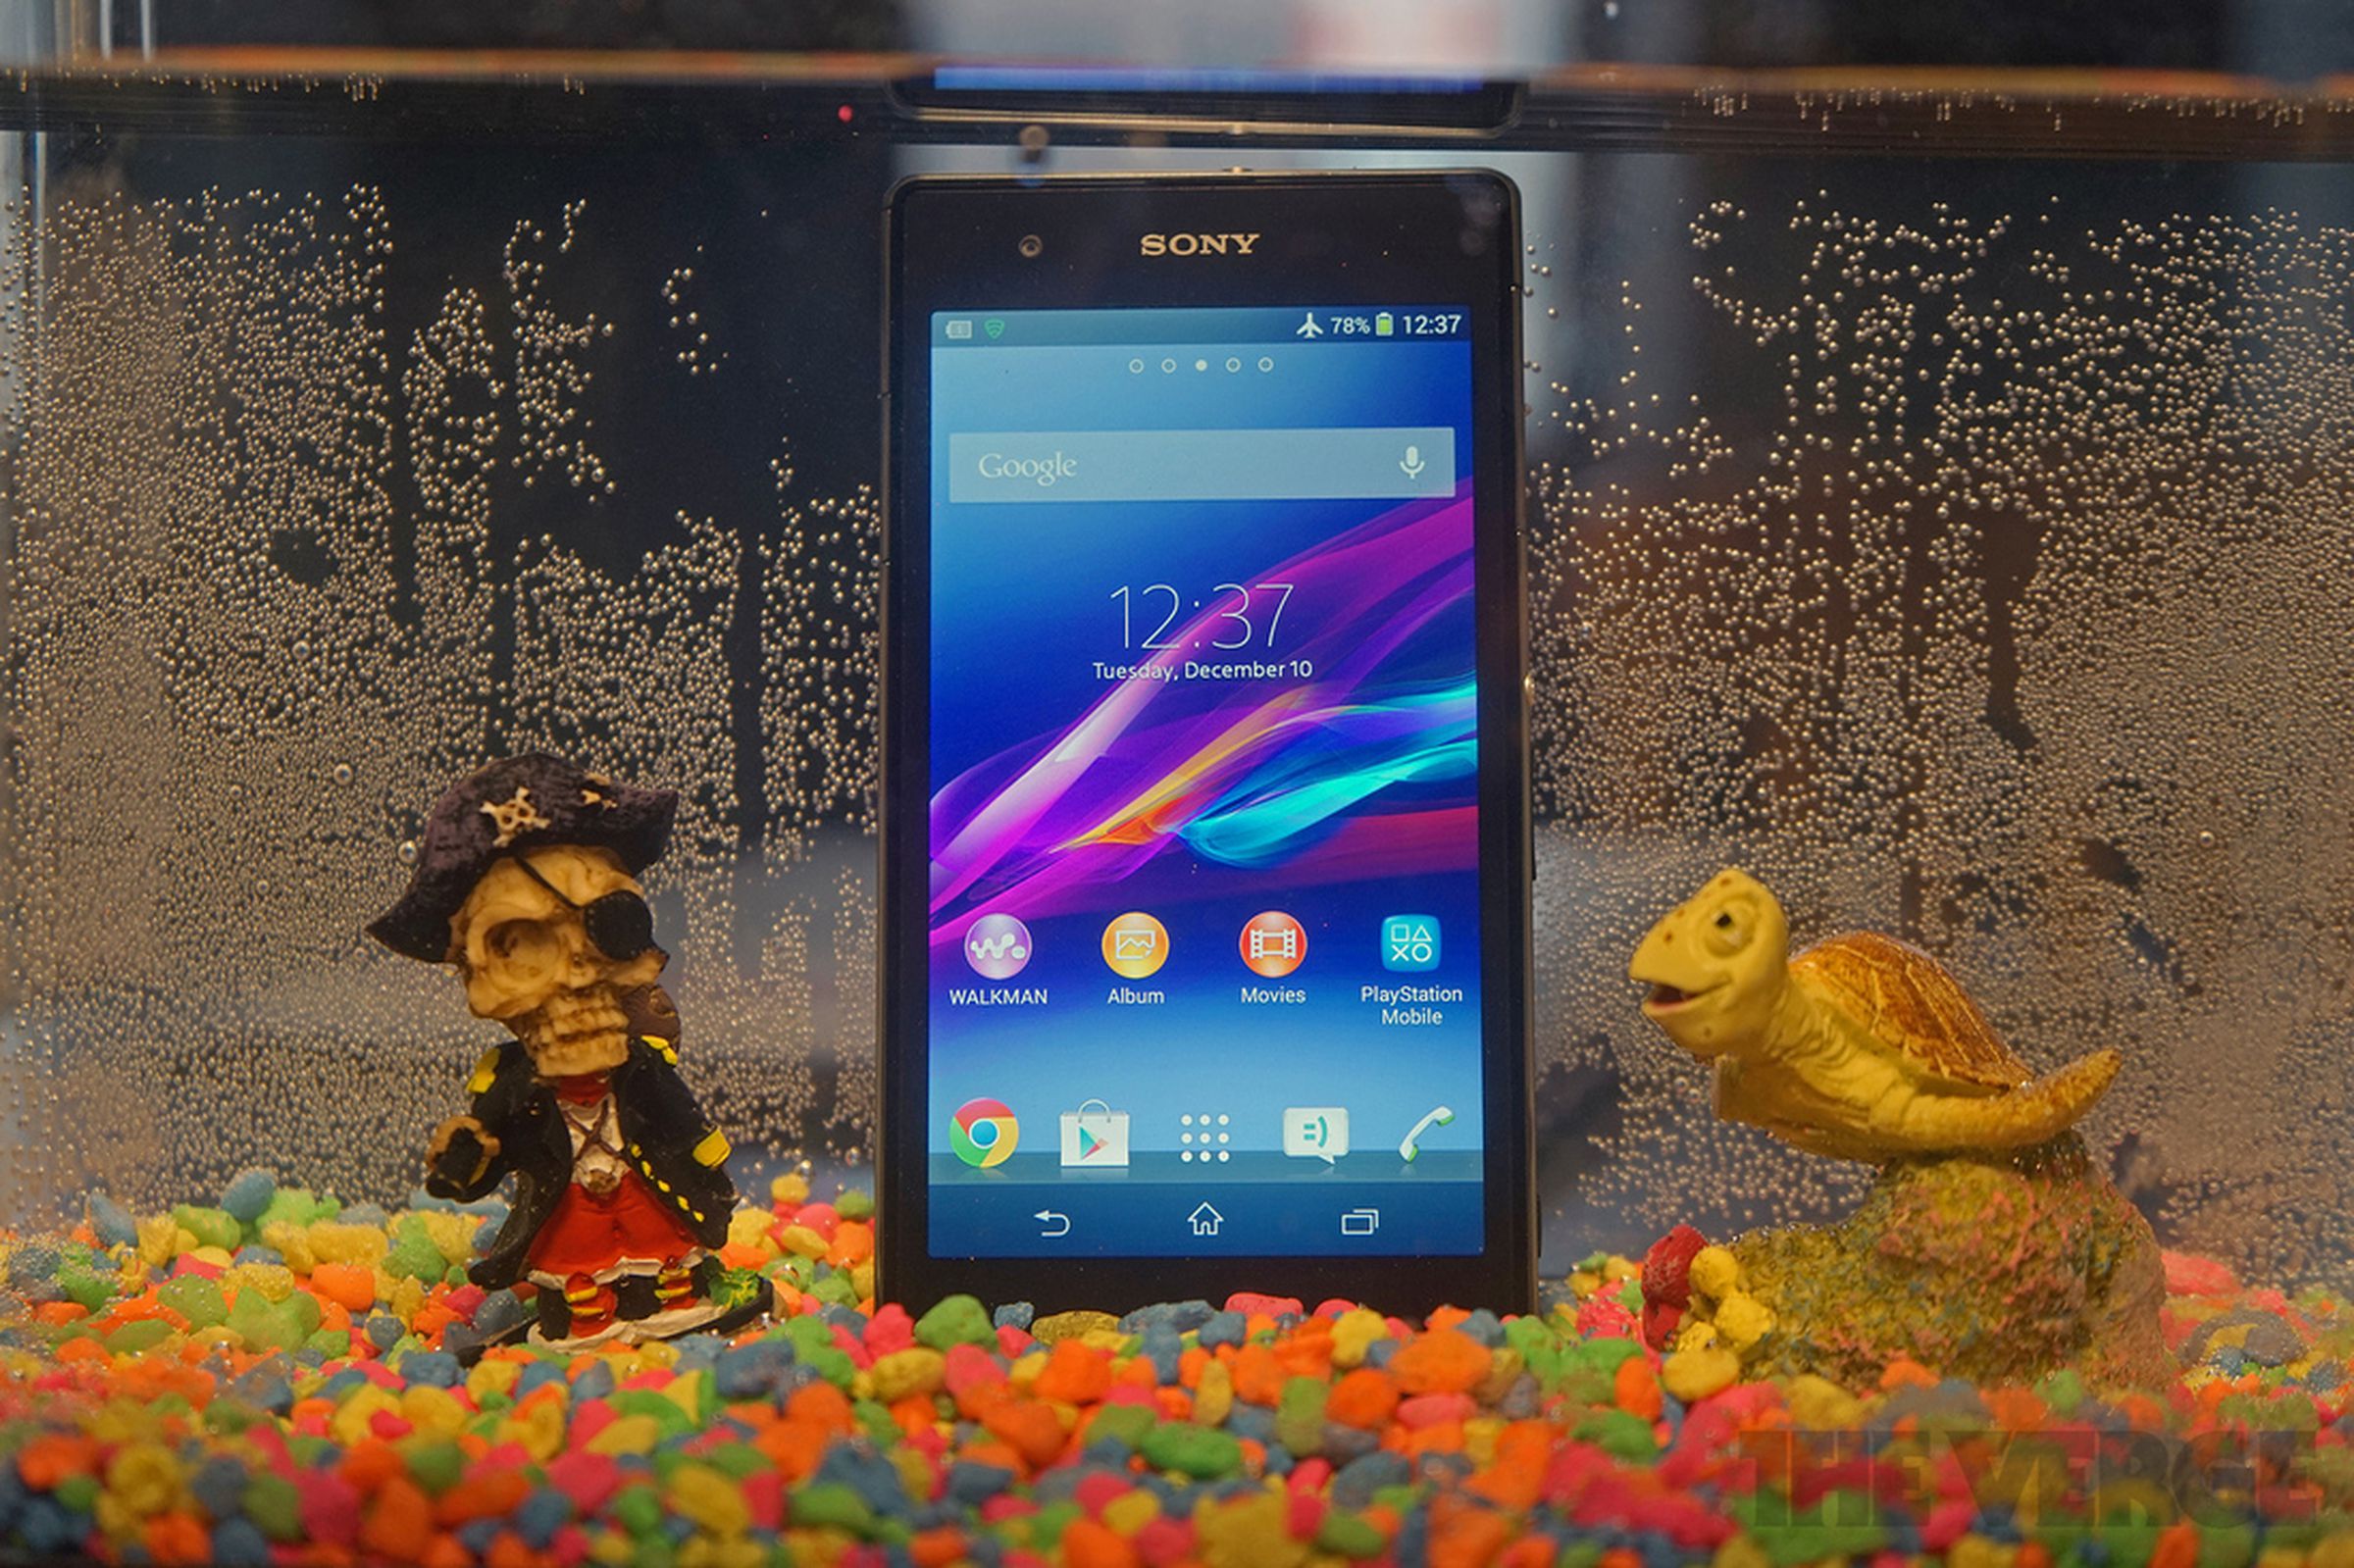 Sony Xperia Z1S for T-Mobile hands-on pictures